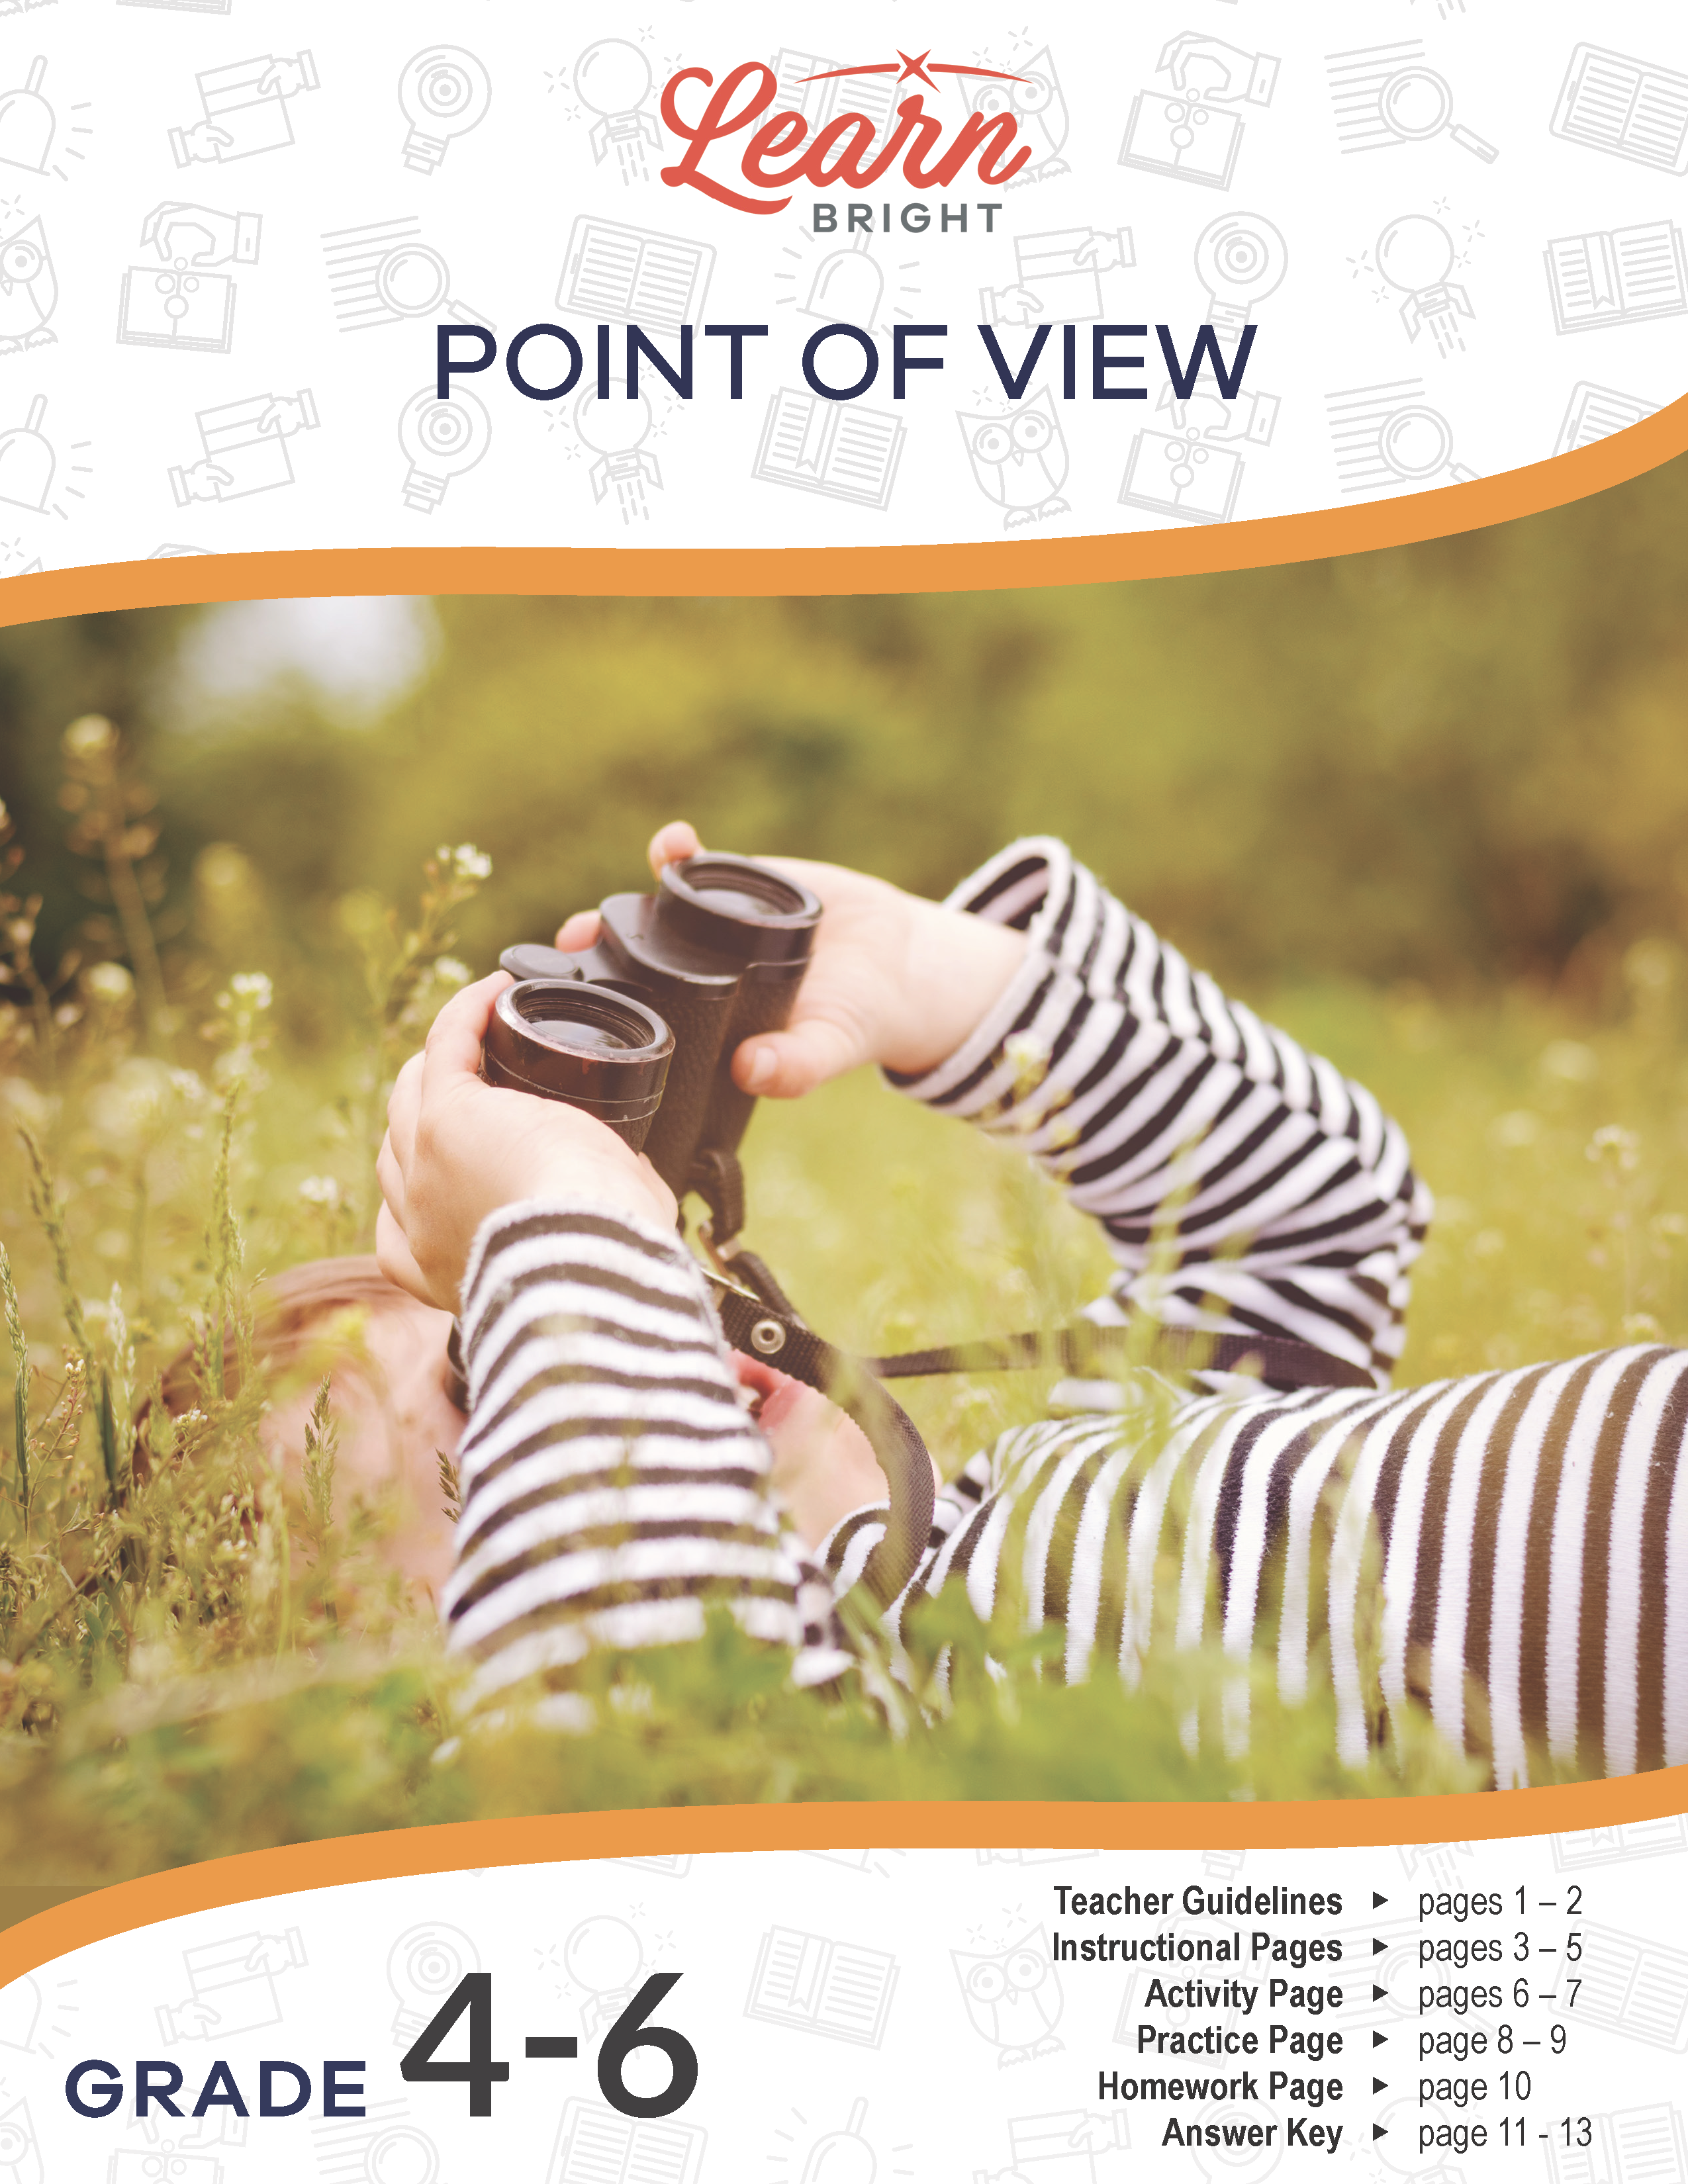 This is the title page for the Point of View Grades 4-6 lesson plan. The main image is of a kid lying in a meadow holding binoculars to look at the sky. The orange Learn Bright logo is at the top of the page.